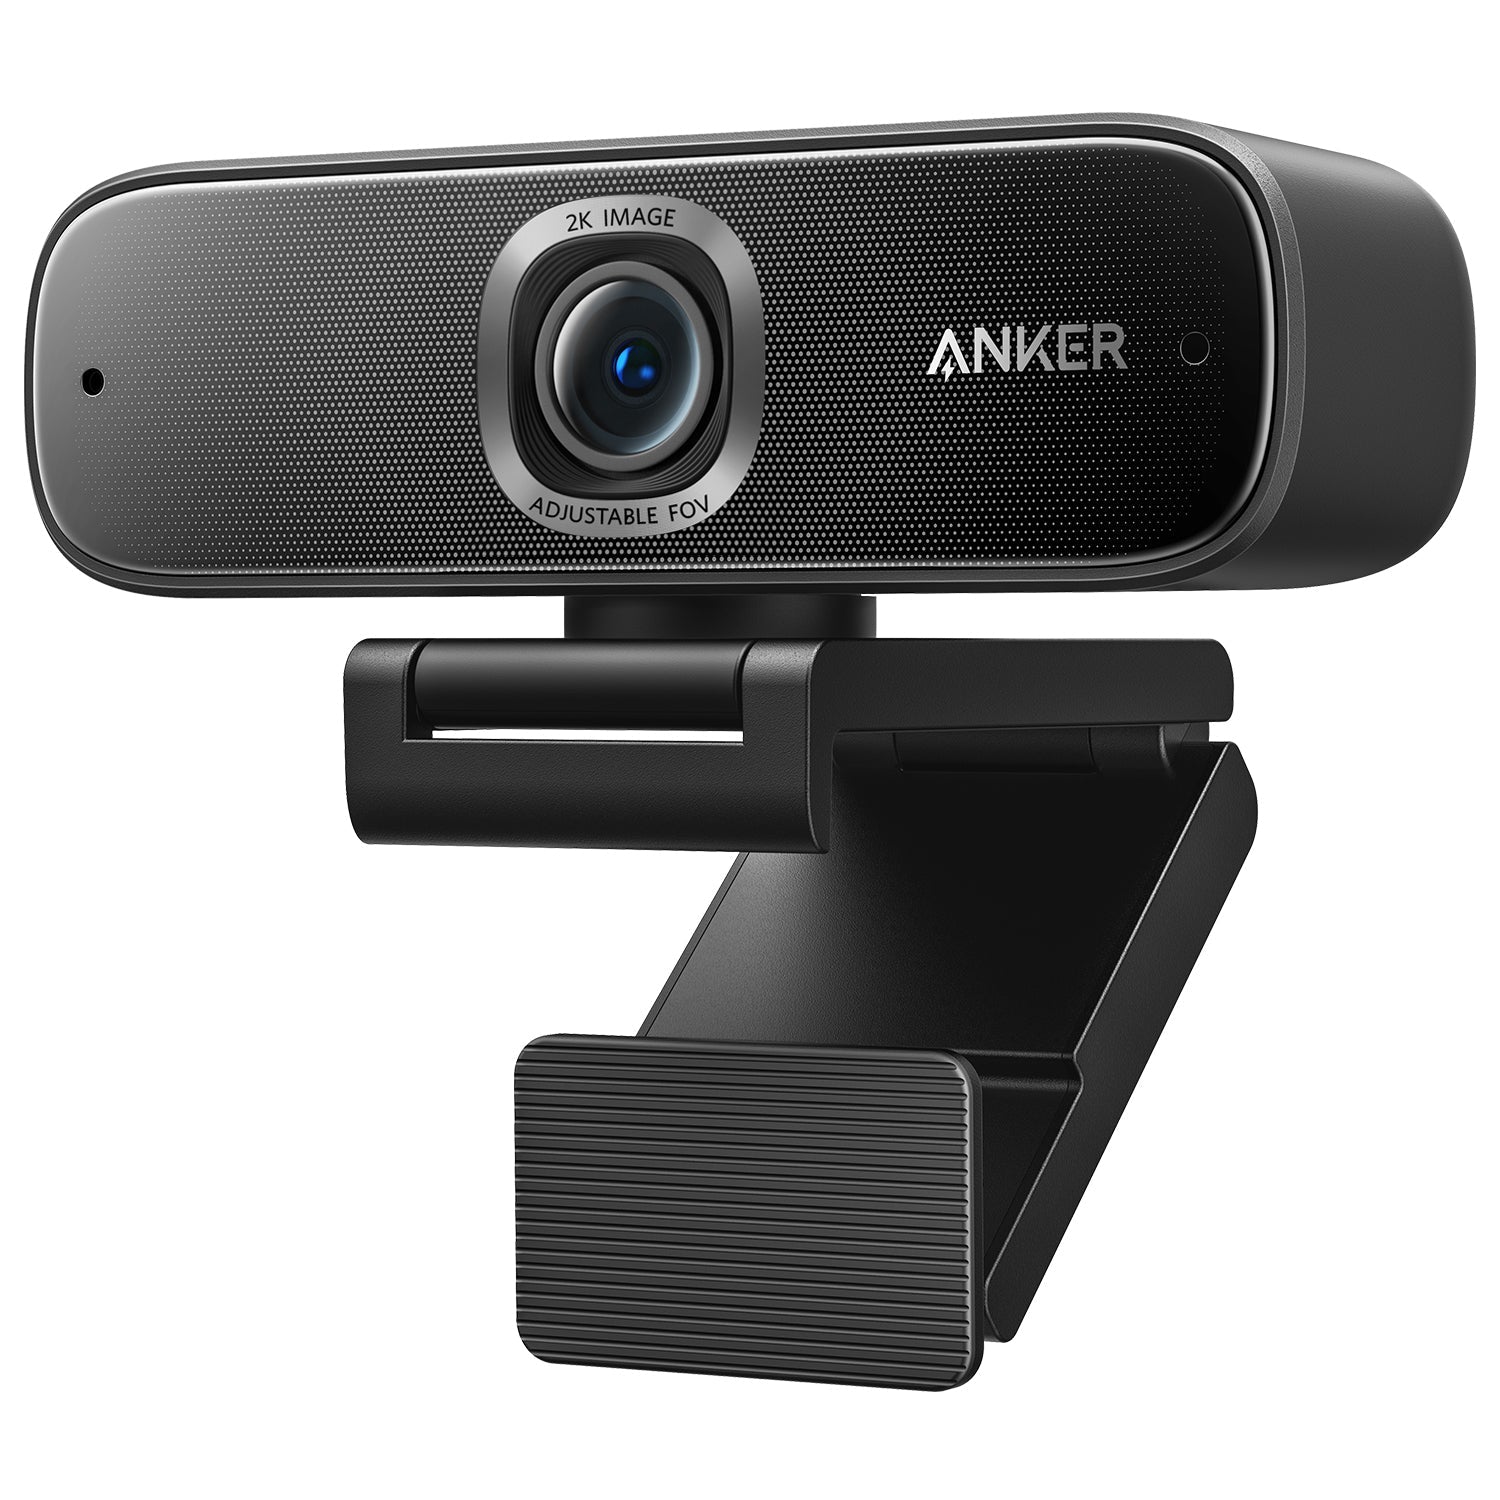 Anker's affordable cameras feature HomeKit support, more from $34